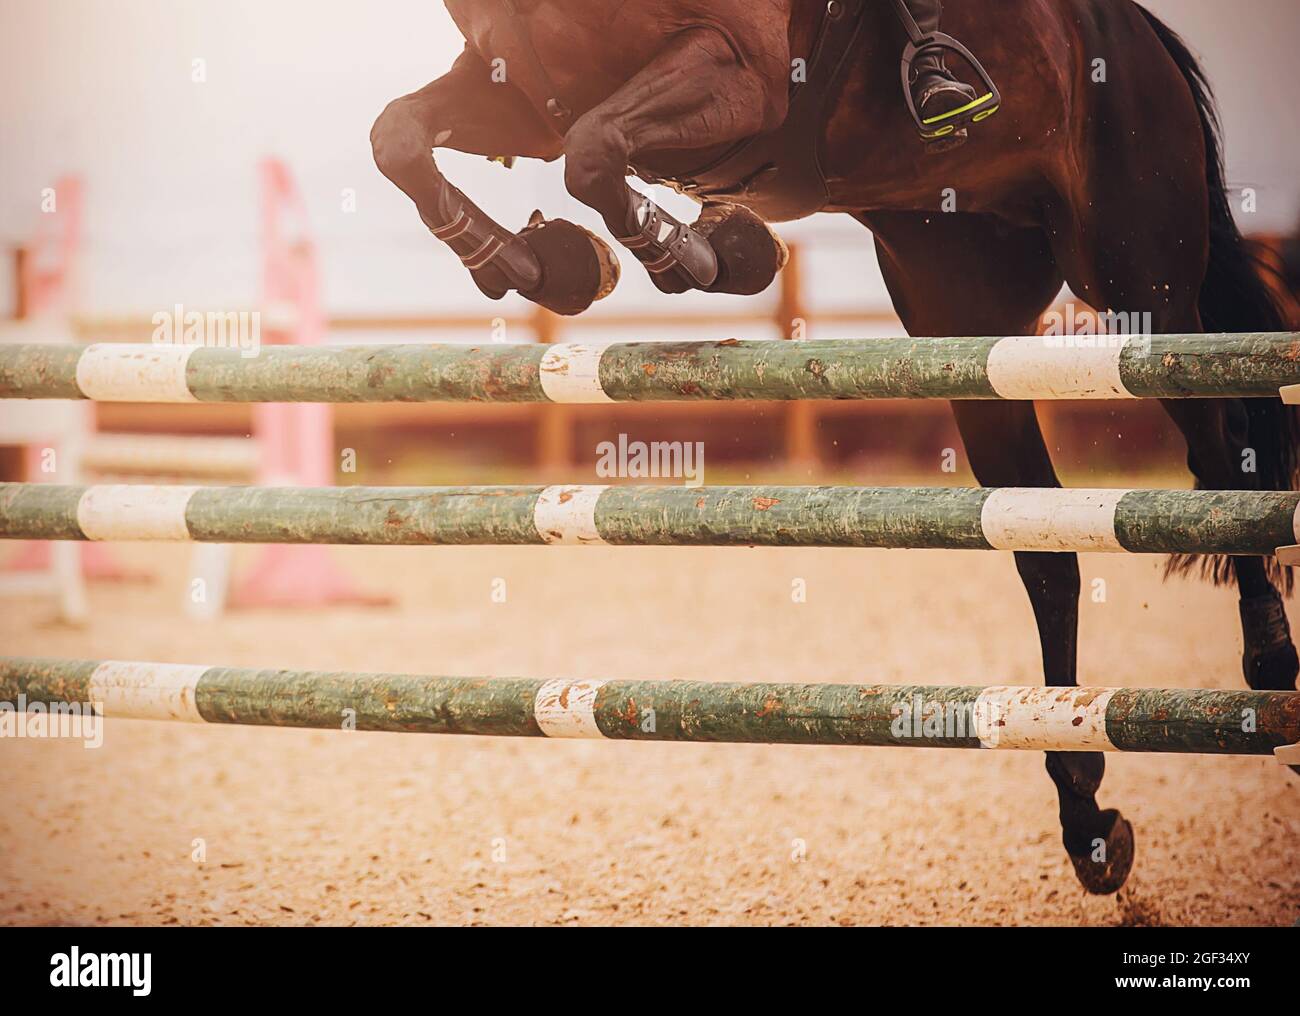 A dark bay racehorse with a rider in the saddle jumps over a green wooden barrier at a show jumping competition. Equestrian sports. Horse riding. Stock Photo